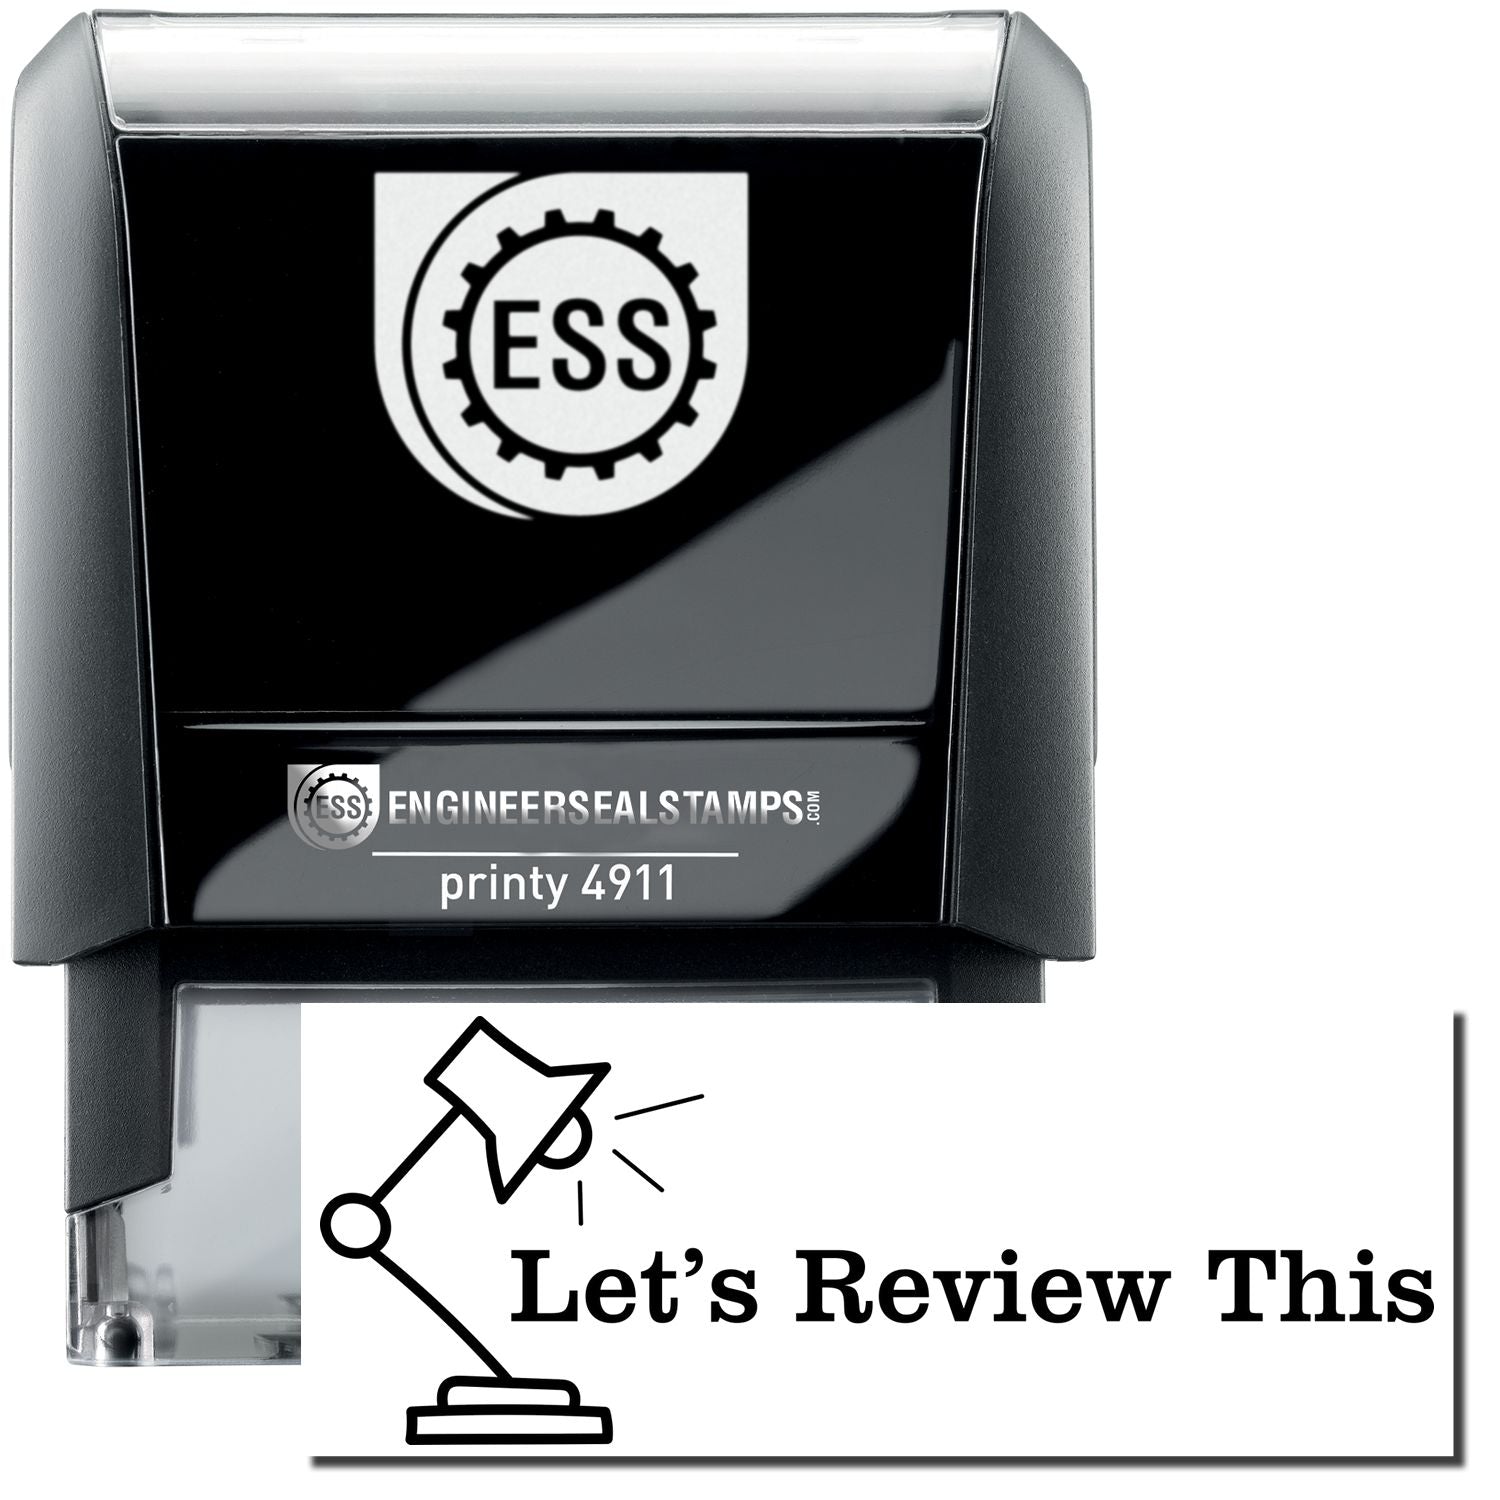 A self-inking stamp with a stamped image showing how the text "Let's Review This" (in bold font with an image of a lamp on the left side) is displayed after stamping.